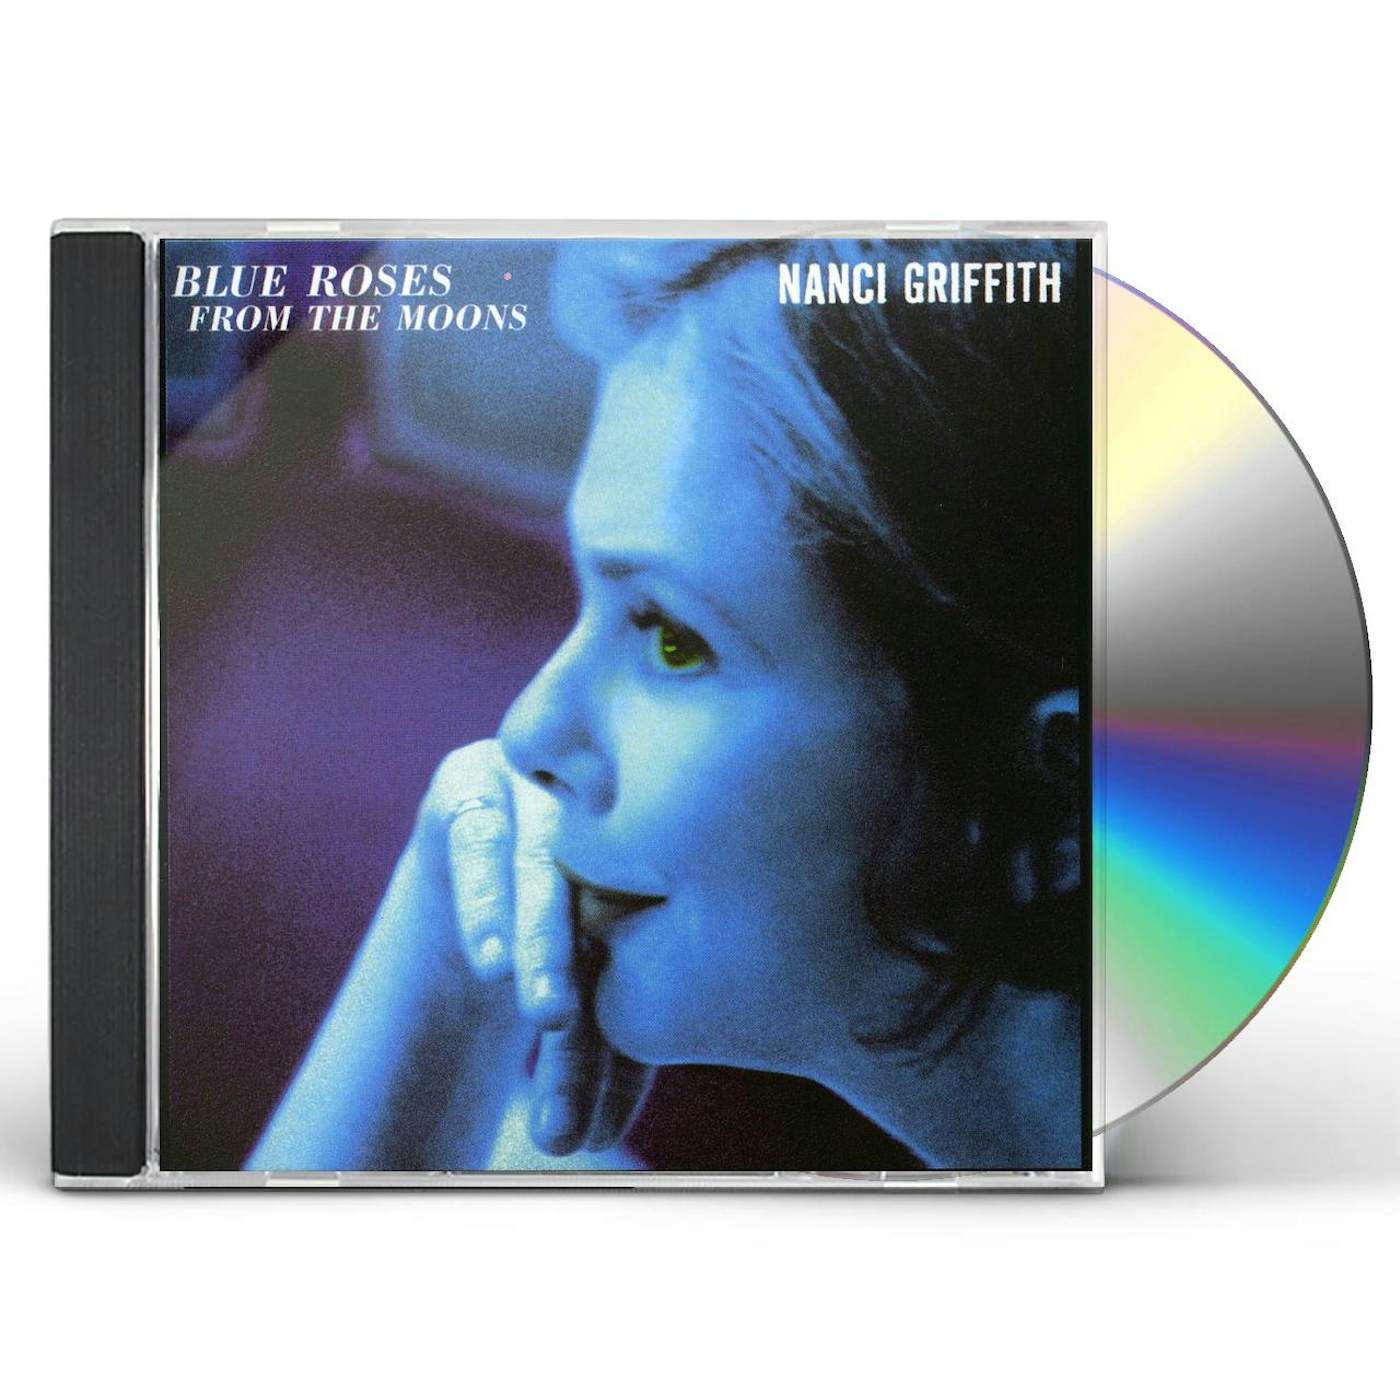 Nanci Griffith BLUE ROSES FROM THE MOONS CD